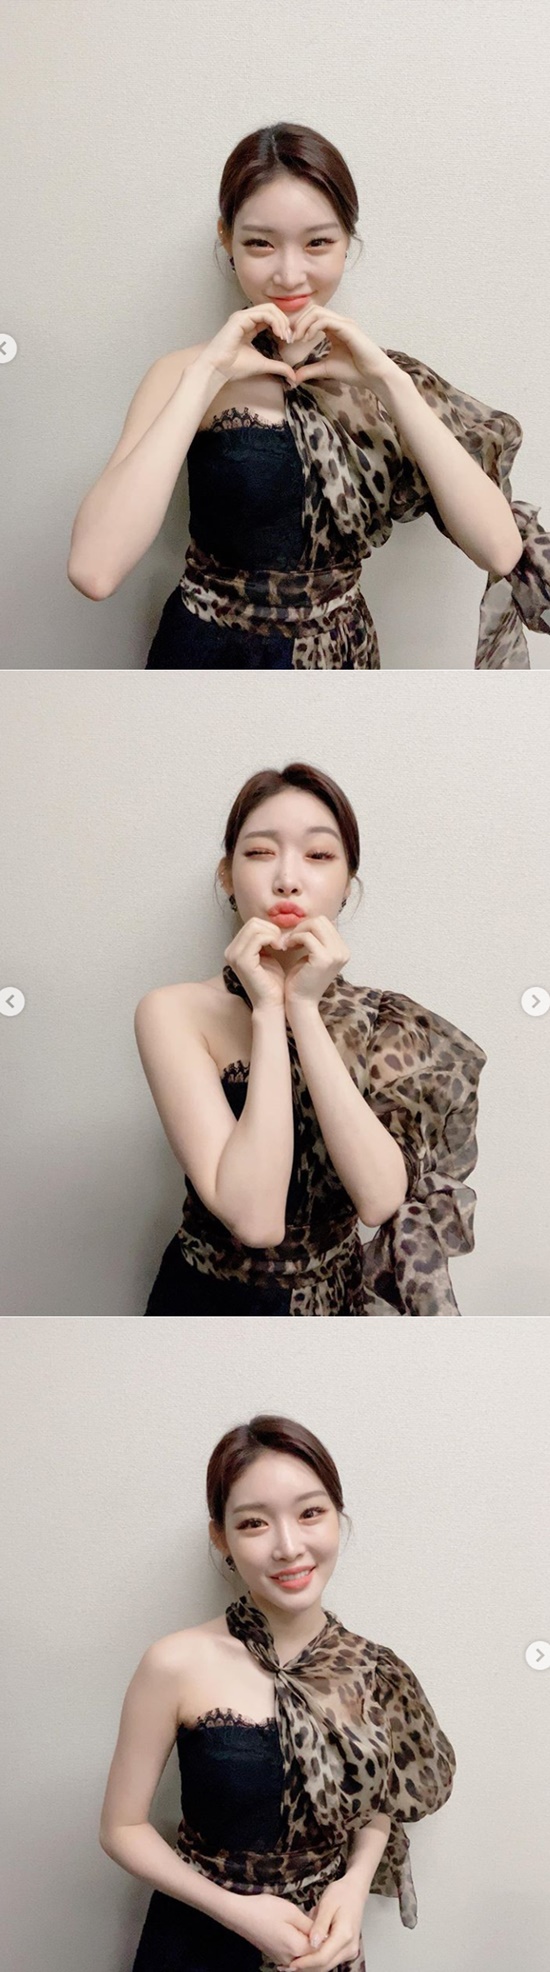 Chungha, who won two gold medals in 2019 MAMA, thanked fans.Chungha said on his Instagram on the 5th, Thank you so much today.Thank you for making such happy moments every time and believing in me more than me. Im shaking and I cant believe it every time.I will always be a more sincere and mature person with a lower attitude without forgetting that these moments I feel and experience are not natural but made by the stars together.Careful health and we have a happy year-end together. He added, expressing his affection for fans.Chungha won two awards at the 2019 MAMA (Mnet Asian Music Awards) held on the 4th, winning both the Best Women Singer Award and Best Dance Performance Solo Award.Photo: Chungha Instagram